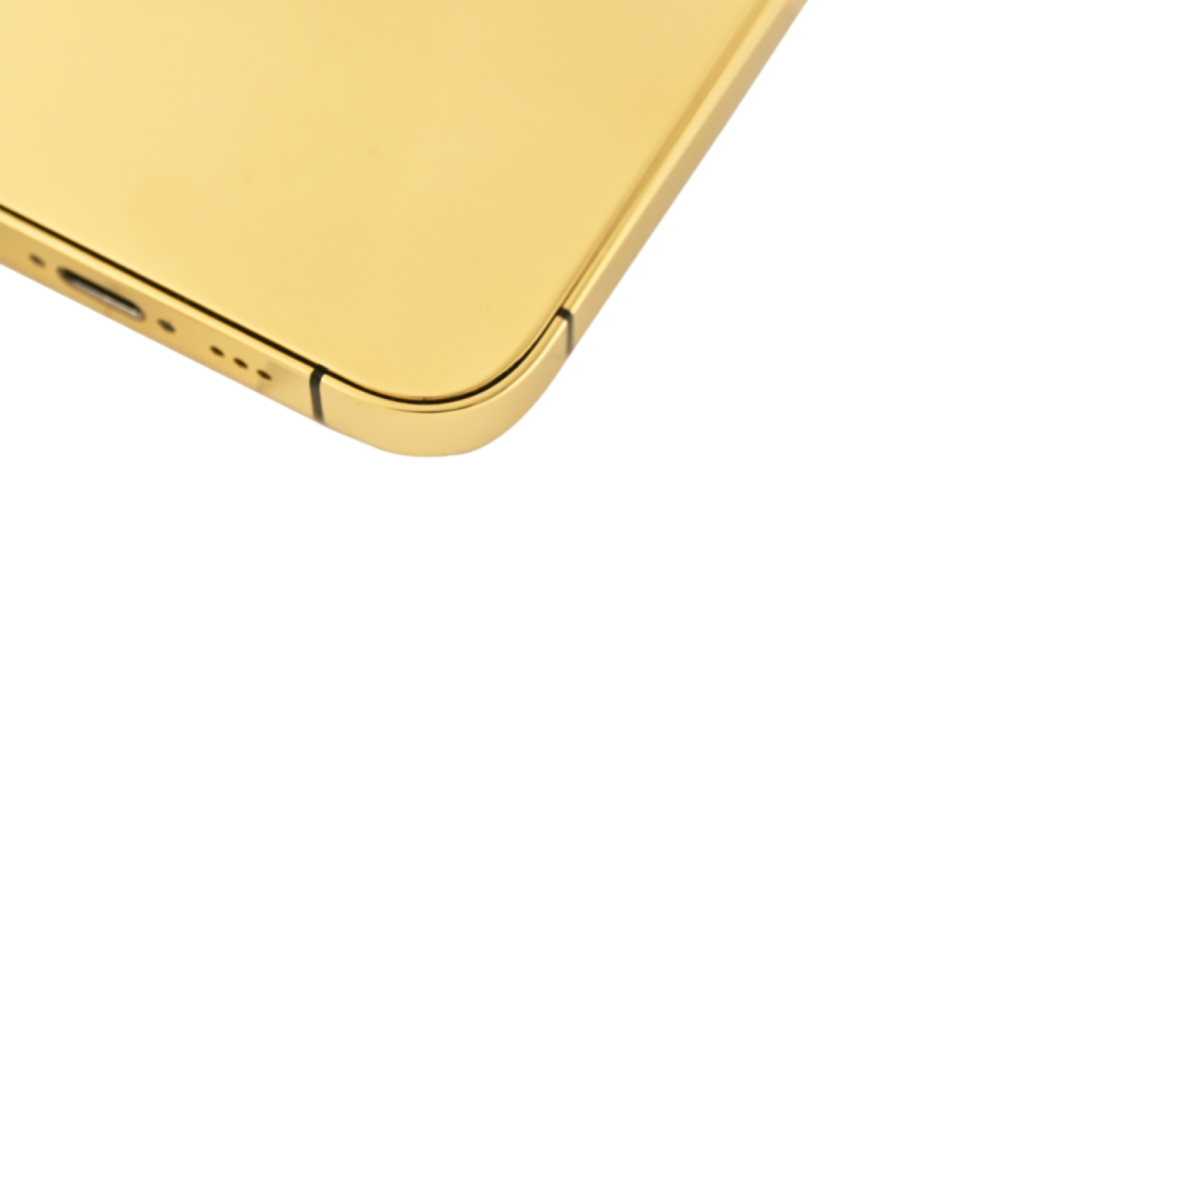 Caviar Luxury 24k Full Gold Customized iPhone 14 Pro Max 1 TB Limited Edition